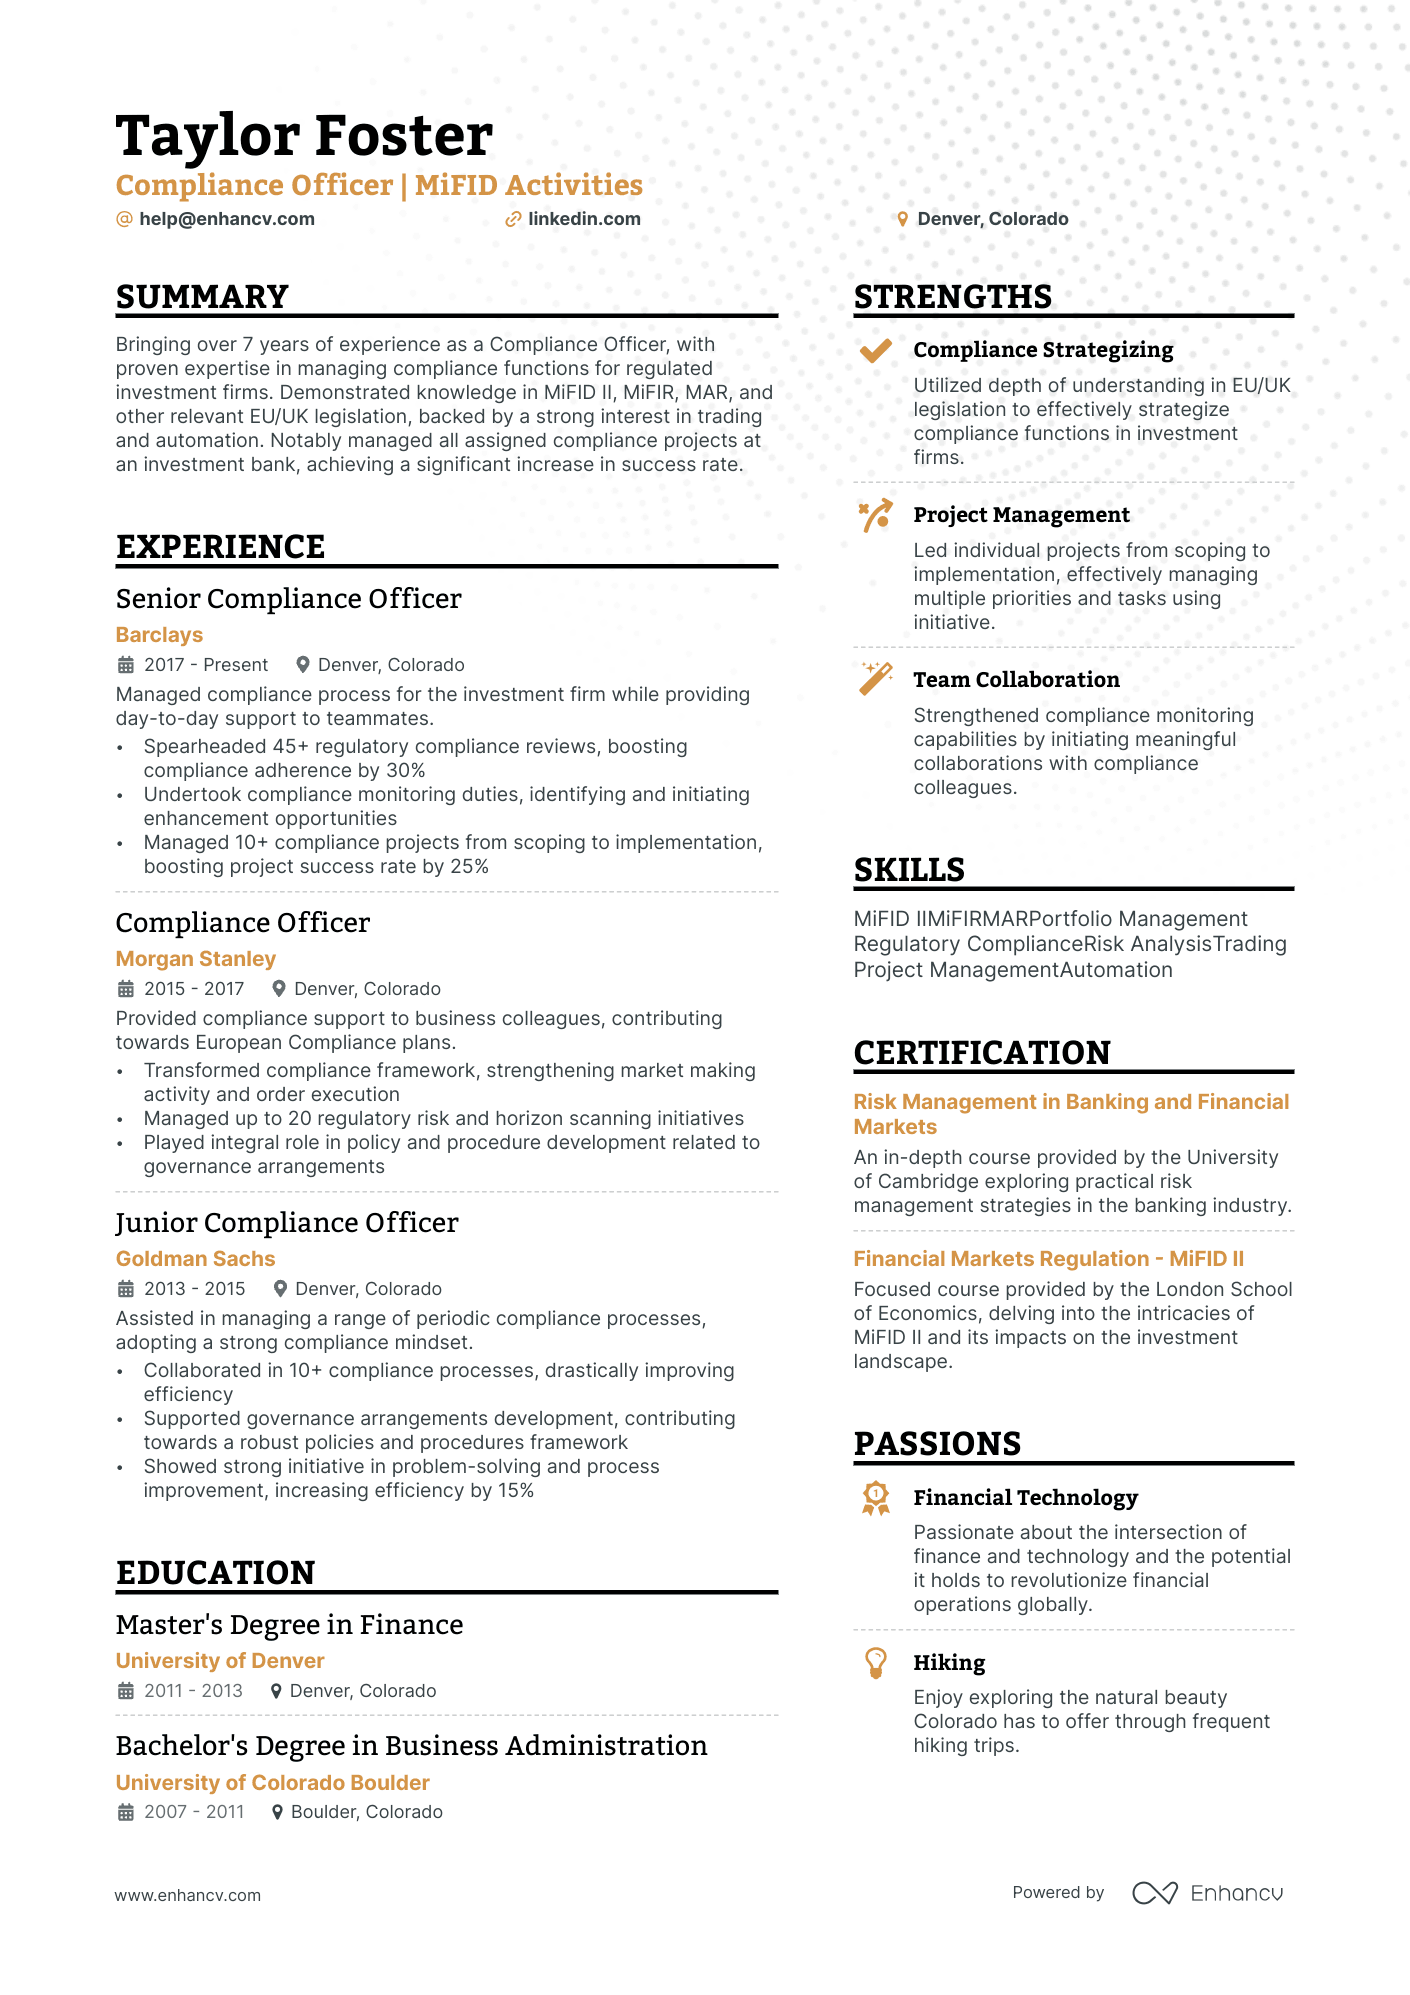 Compliance Officer resume example